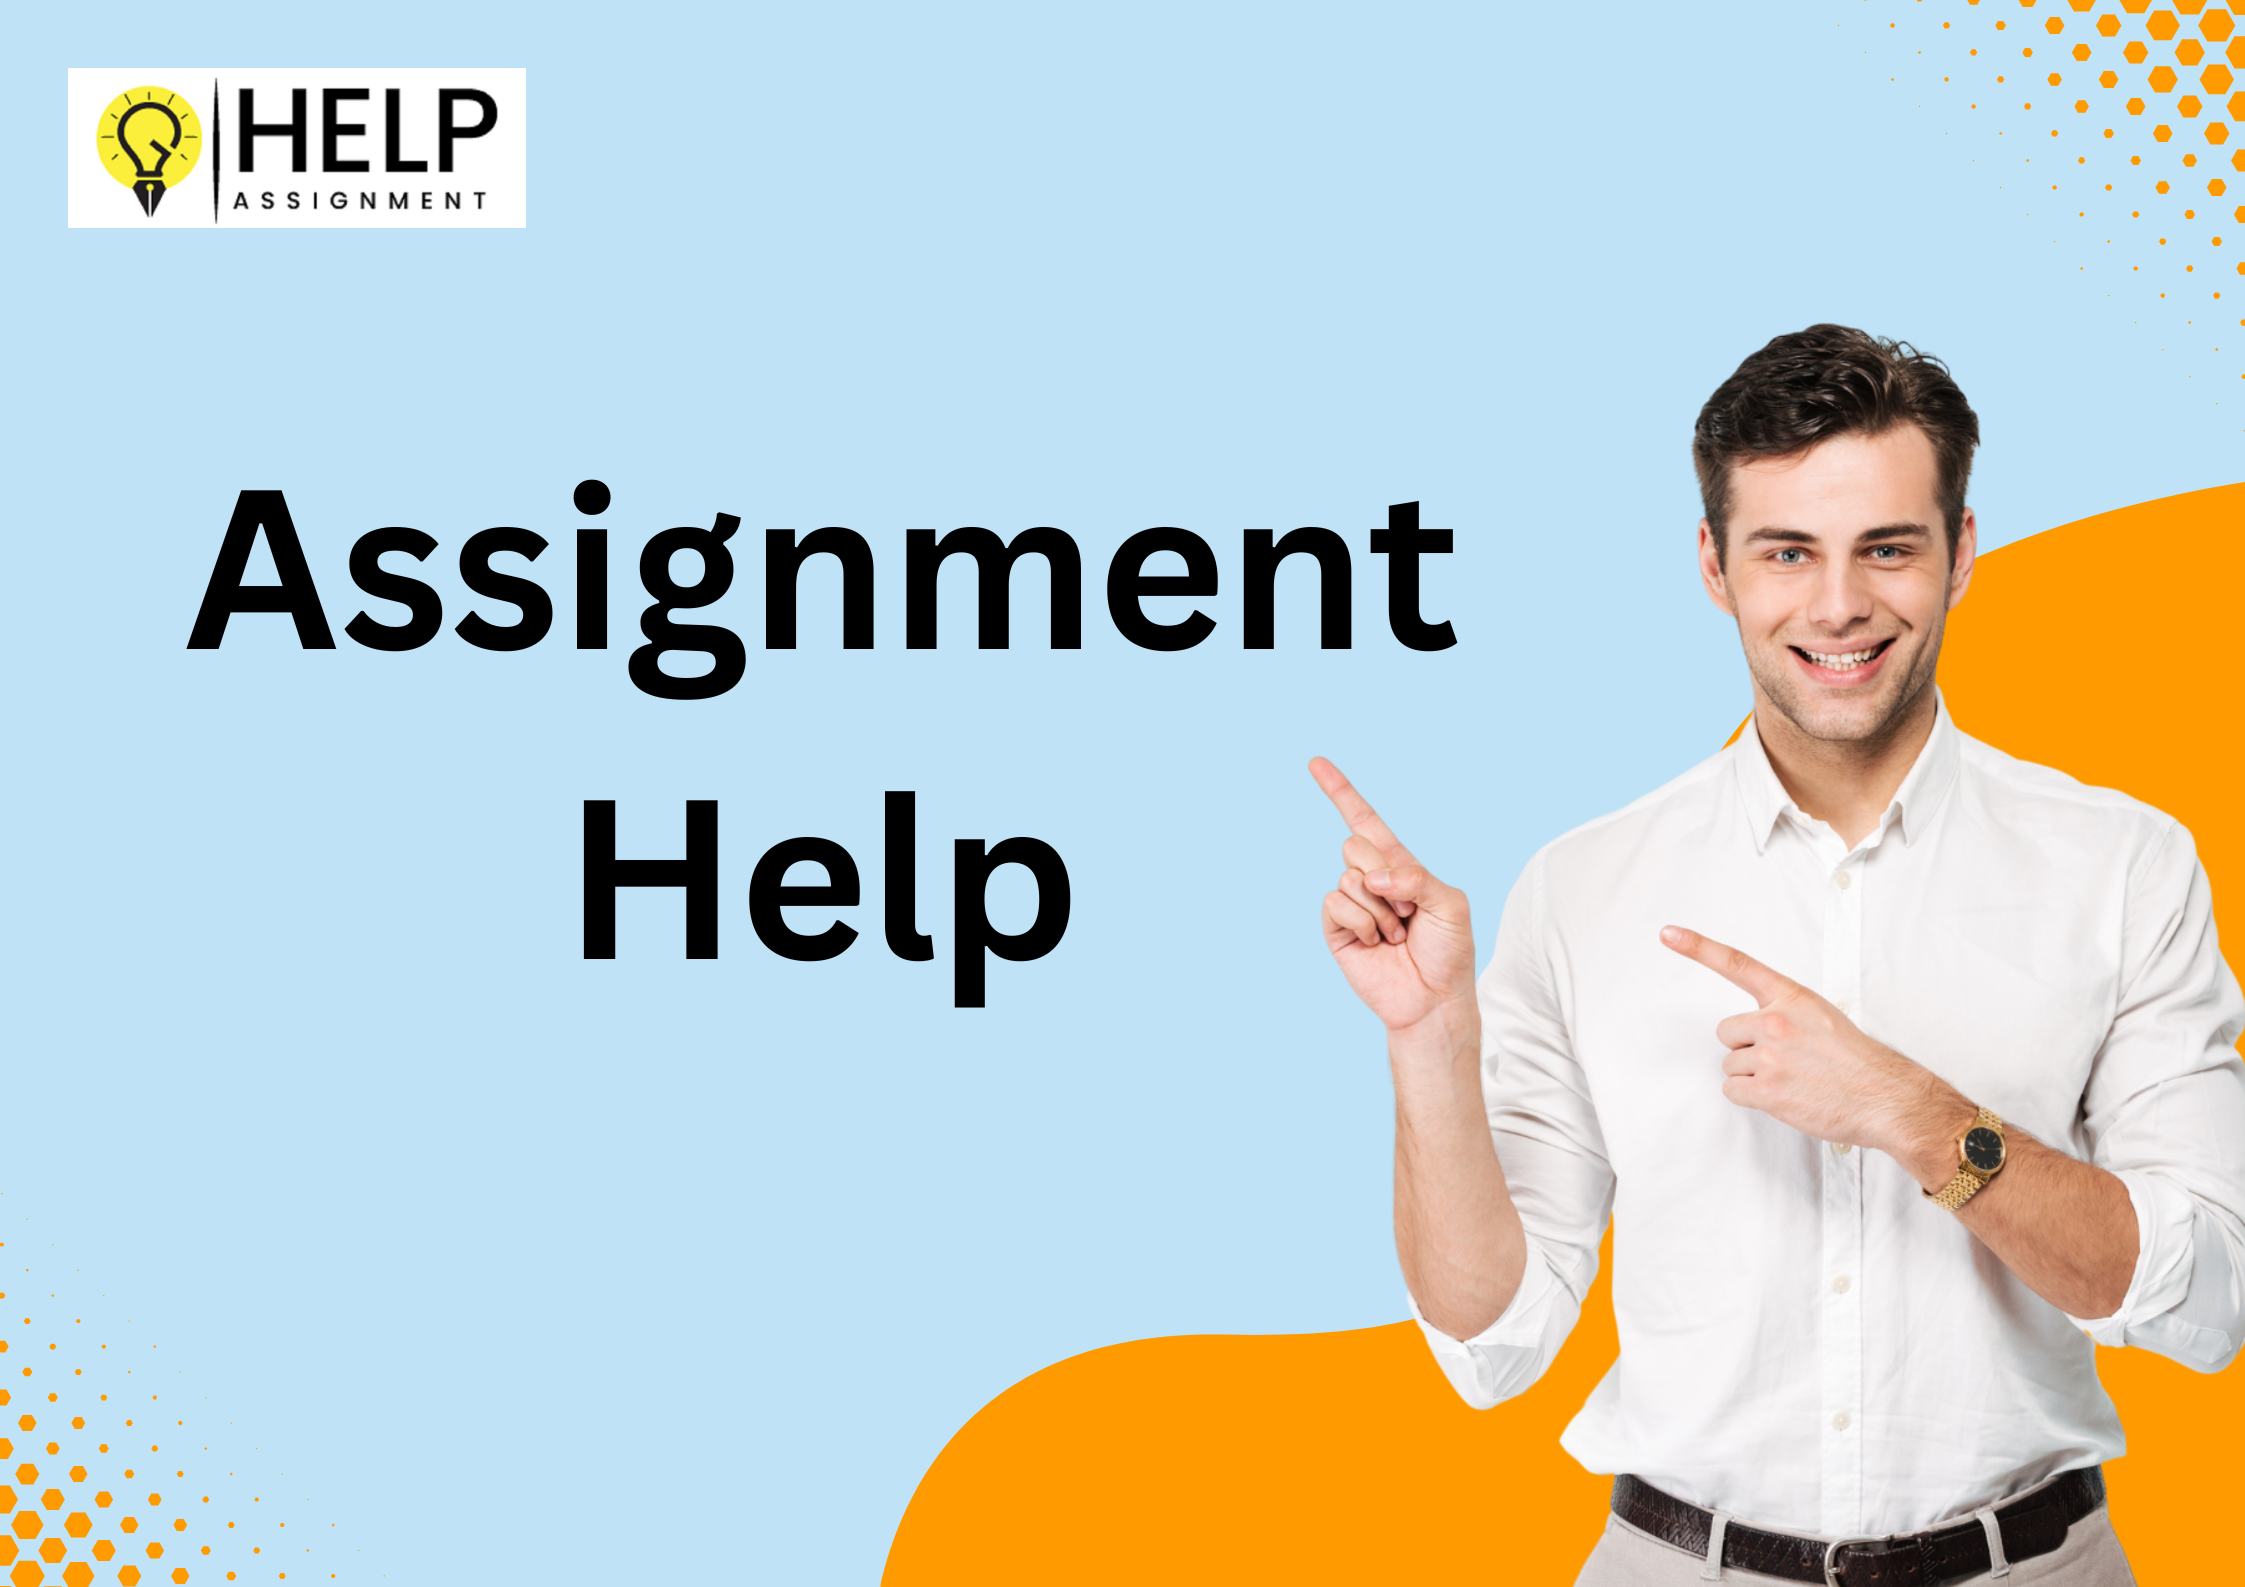 Assignment Help: Get your grades on track with top-notch assignment help